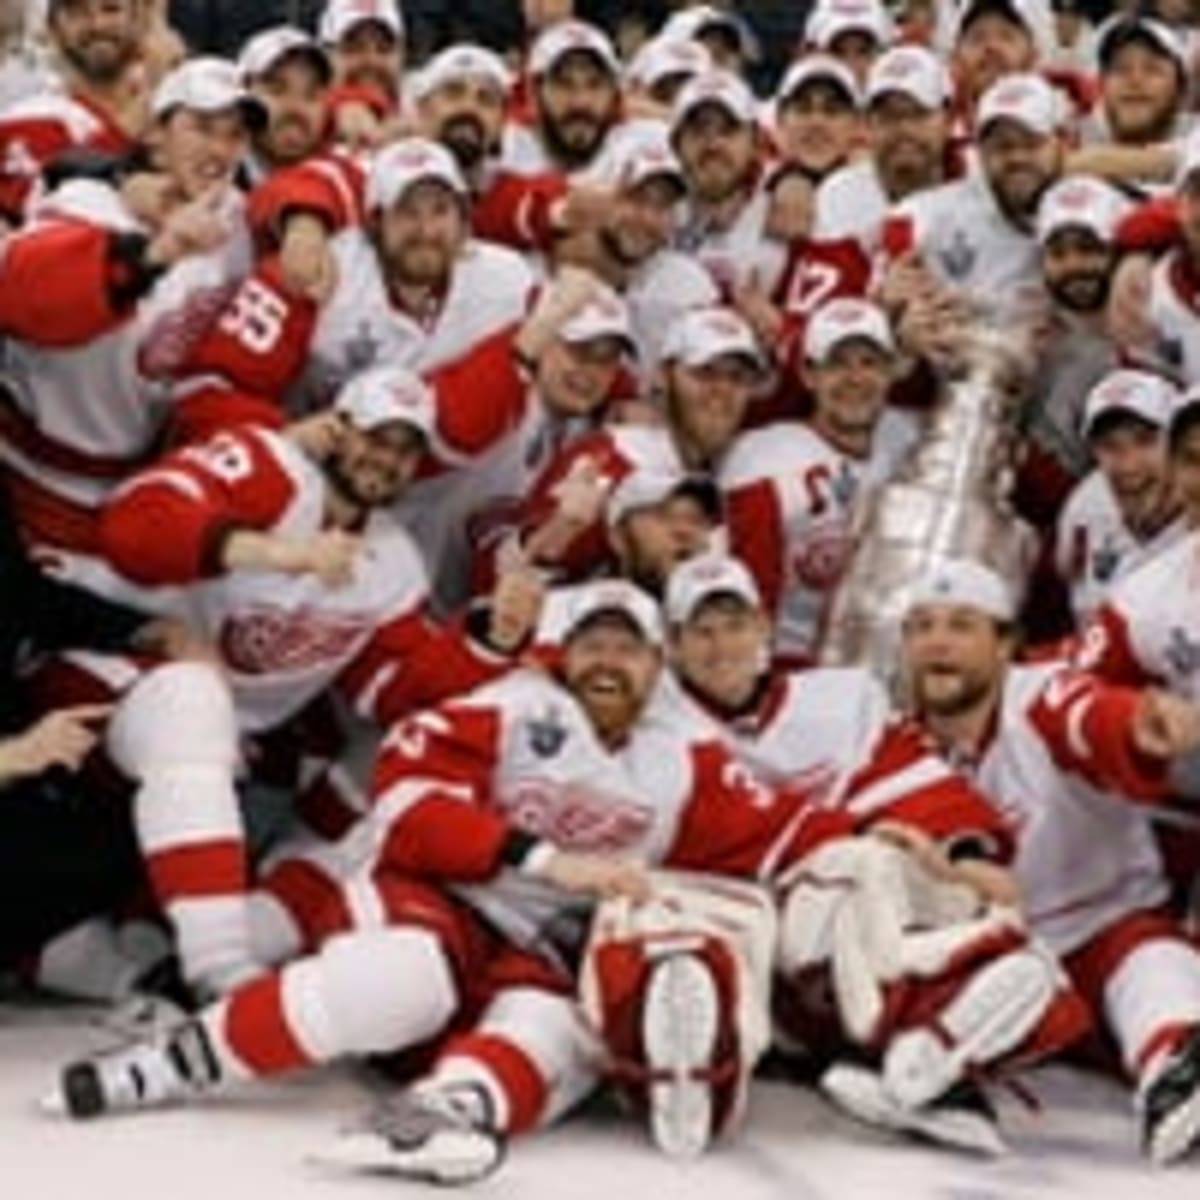 Sports Illustrated Detroit Red Wings Stanley Cup Champions 